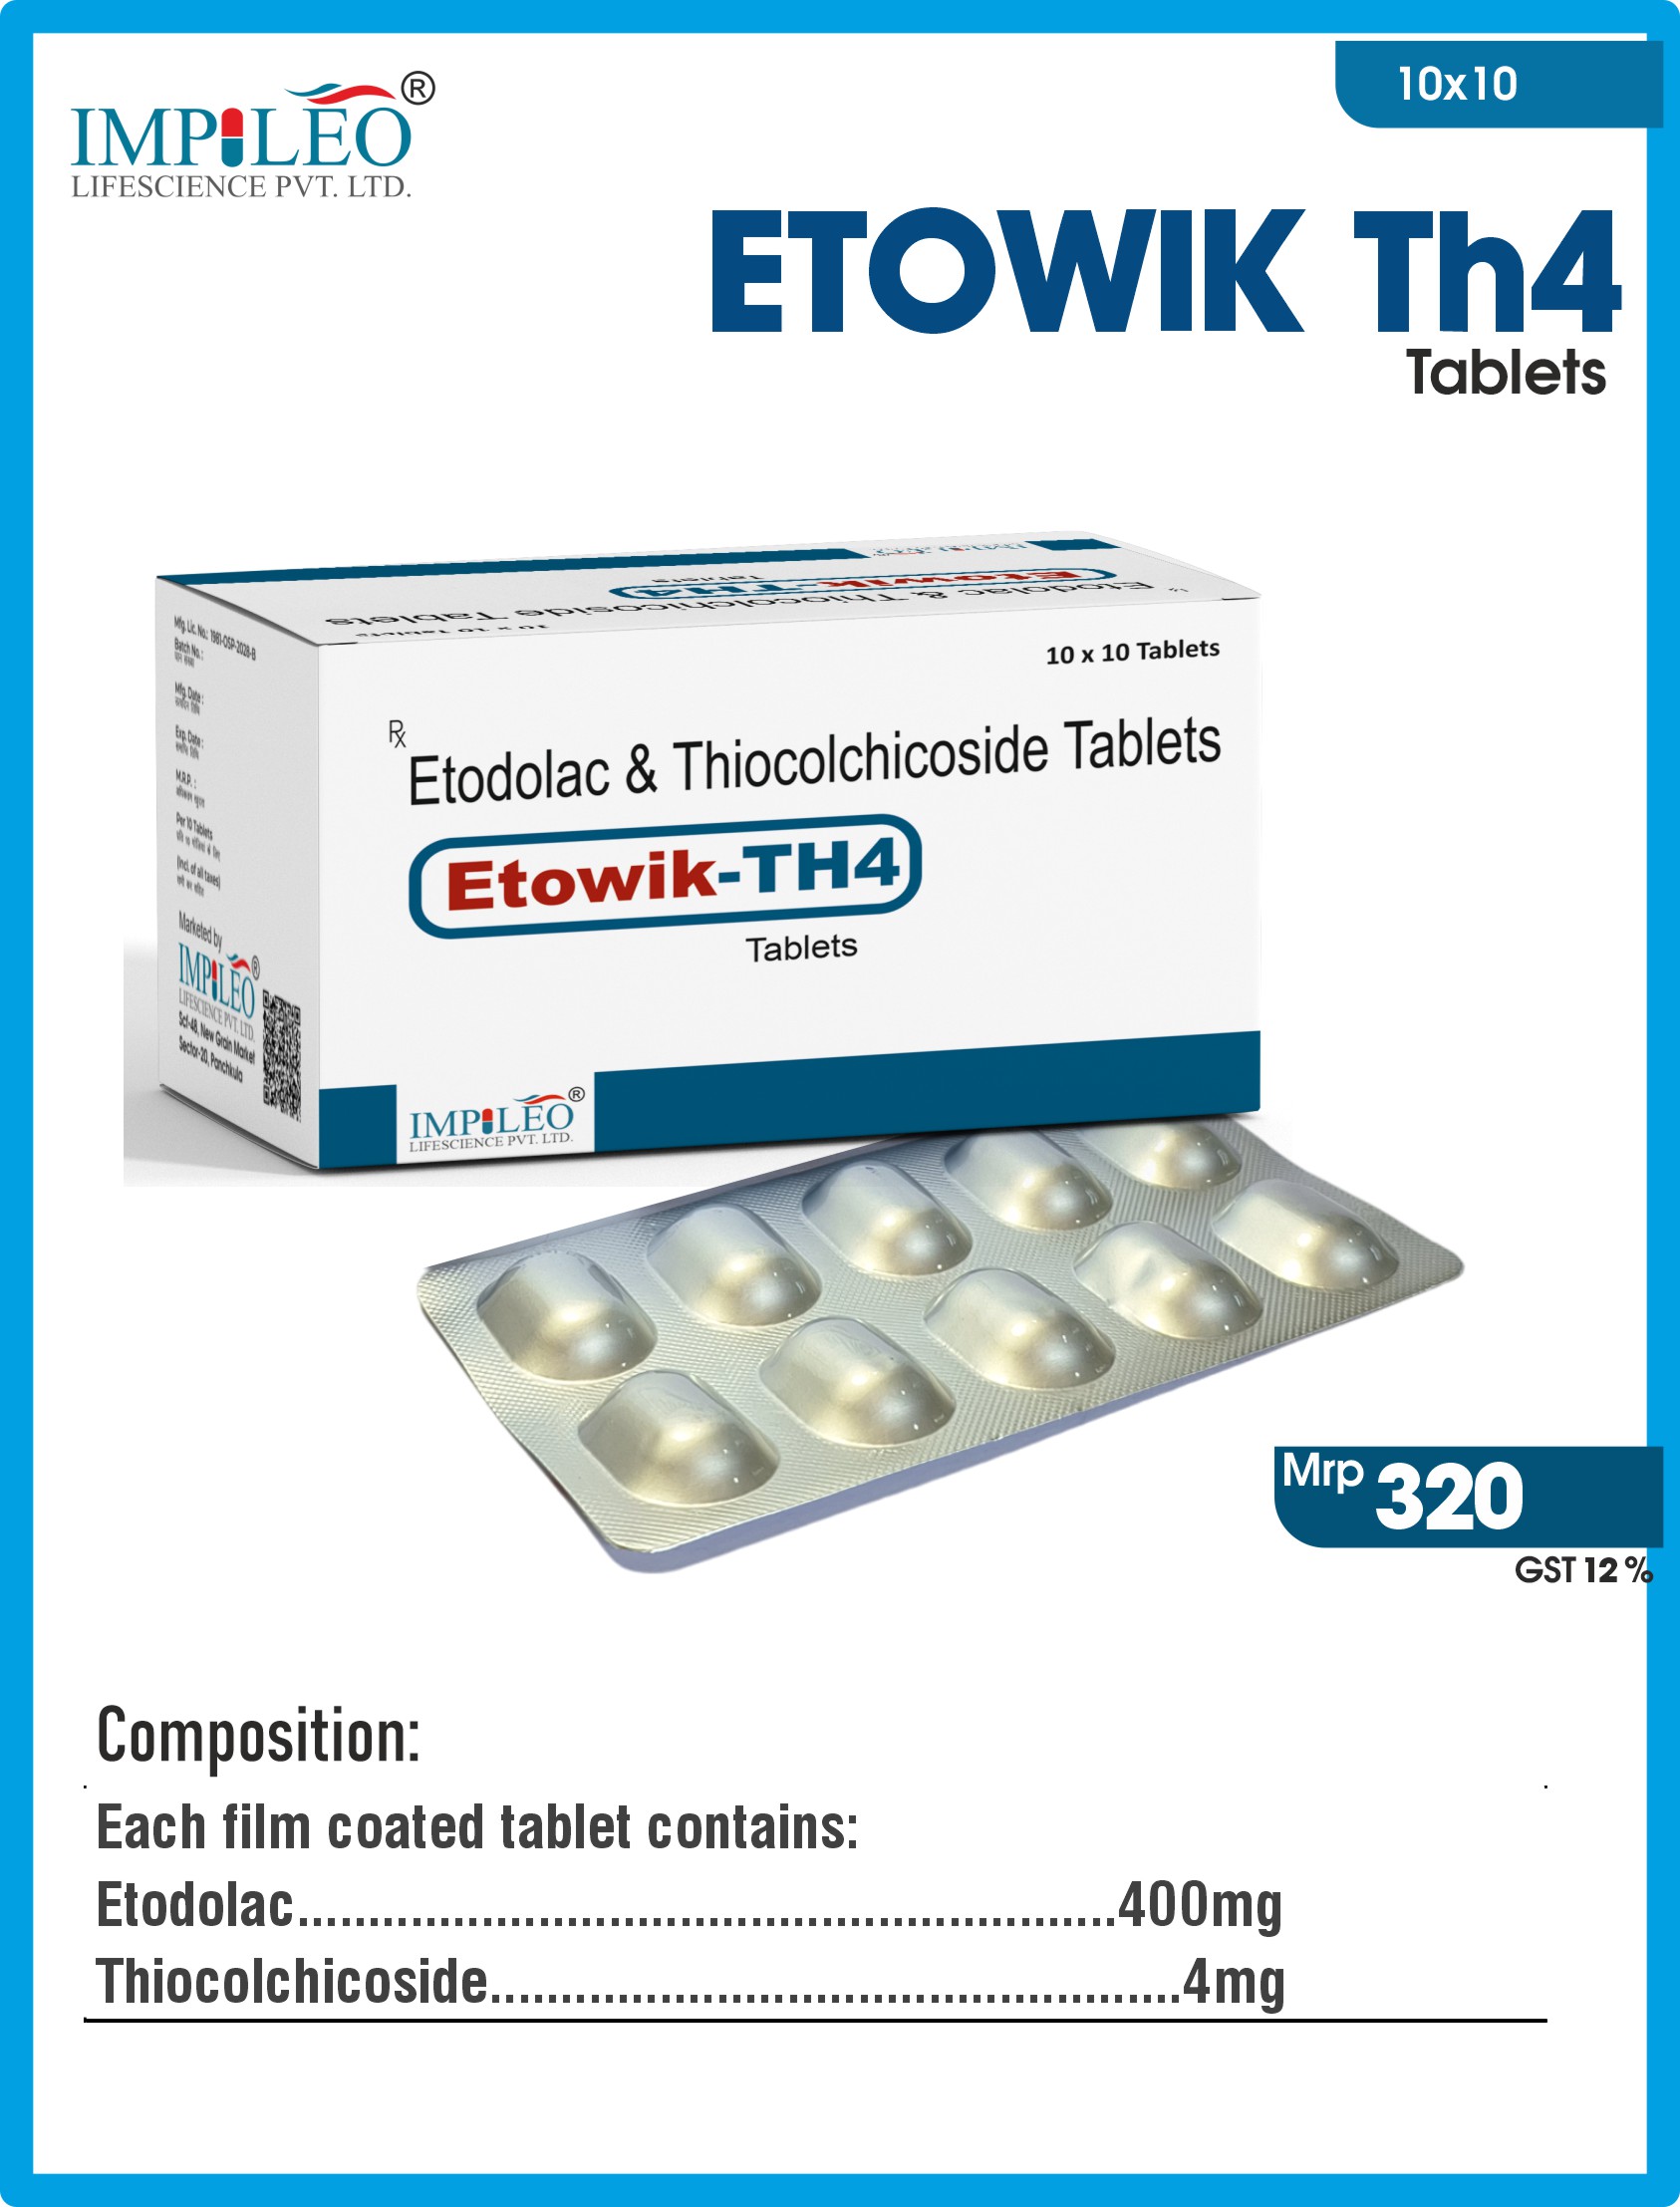 ETOWIK TH4 Tablets - Etodolac & Thiocolchicoside from Top PCD Pharma Franchise in Chandigarh